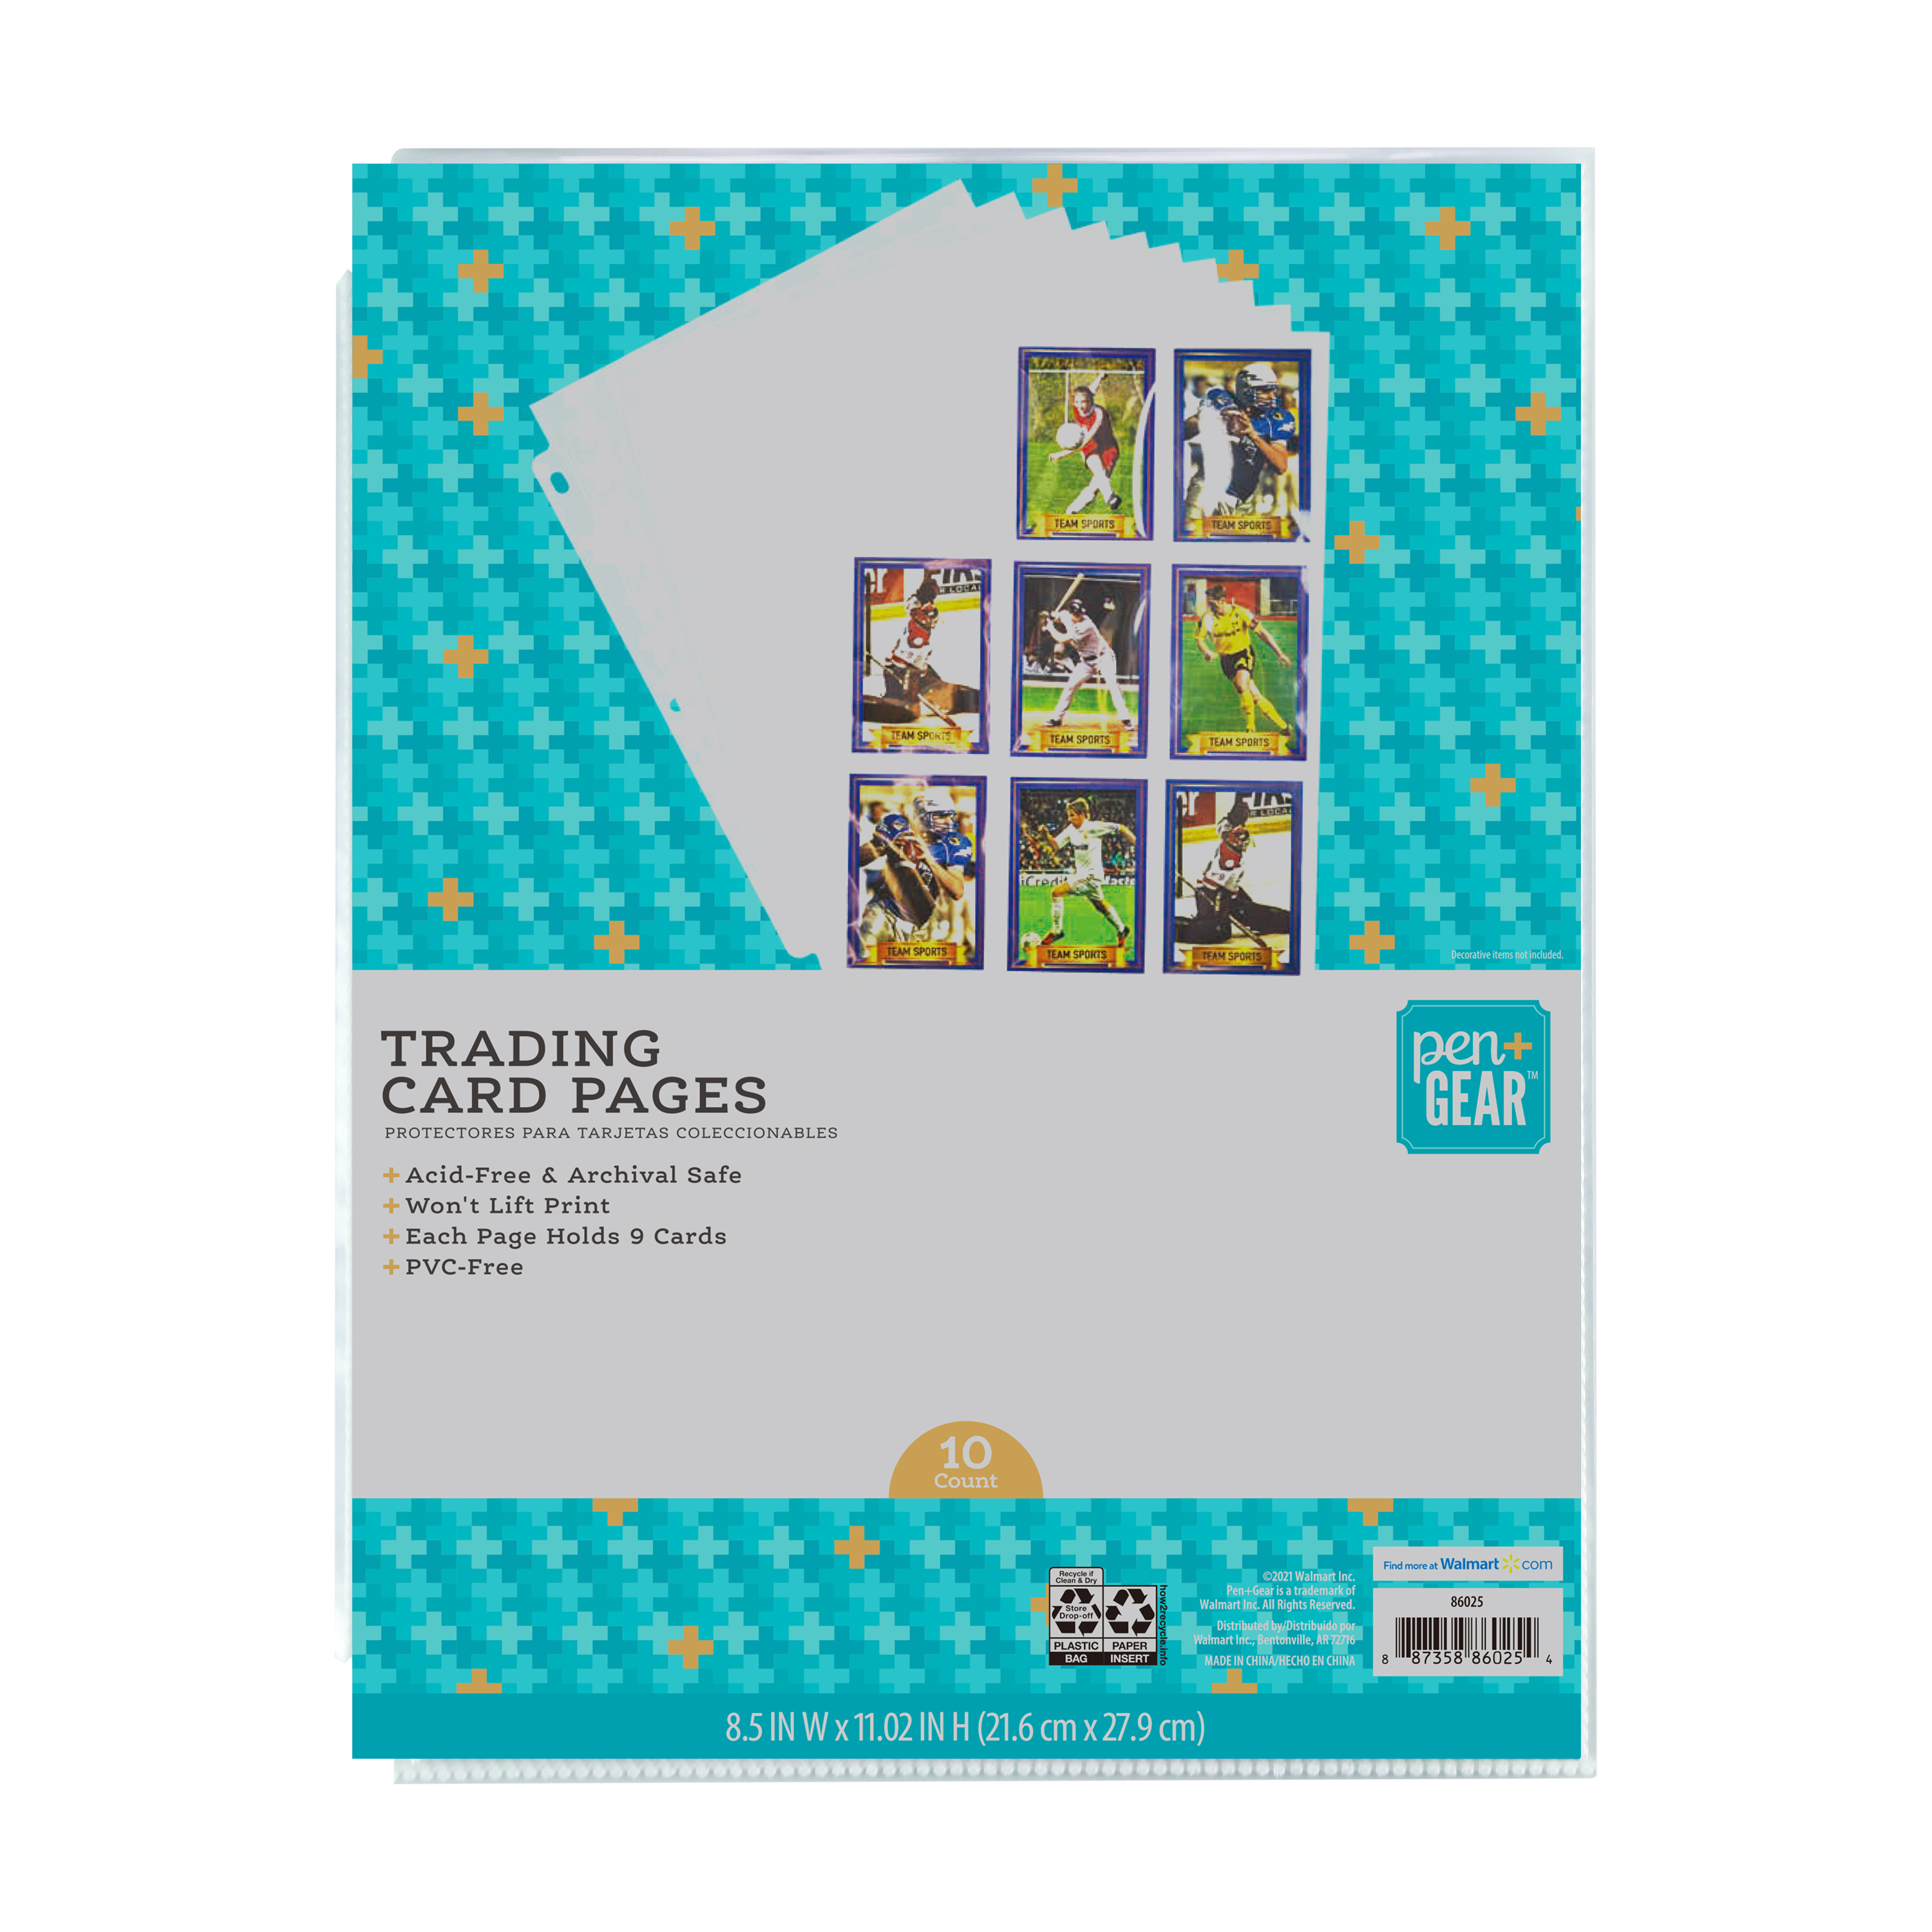 Pen + Gear 9-Pocket Protective Trading Card Pages, Sheet Protectors, Clear, 10 Count - image 1 of 5